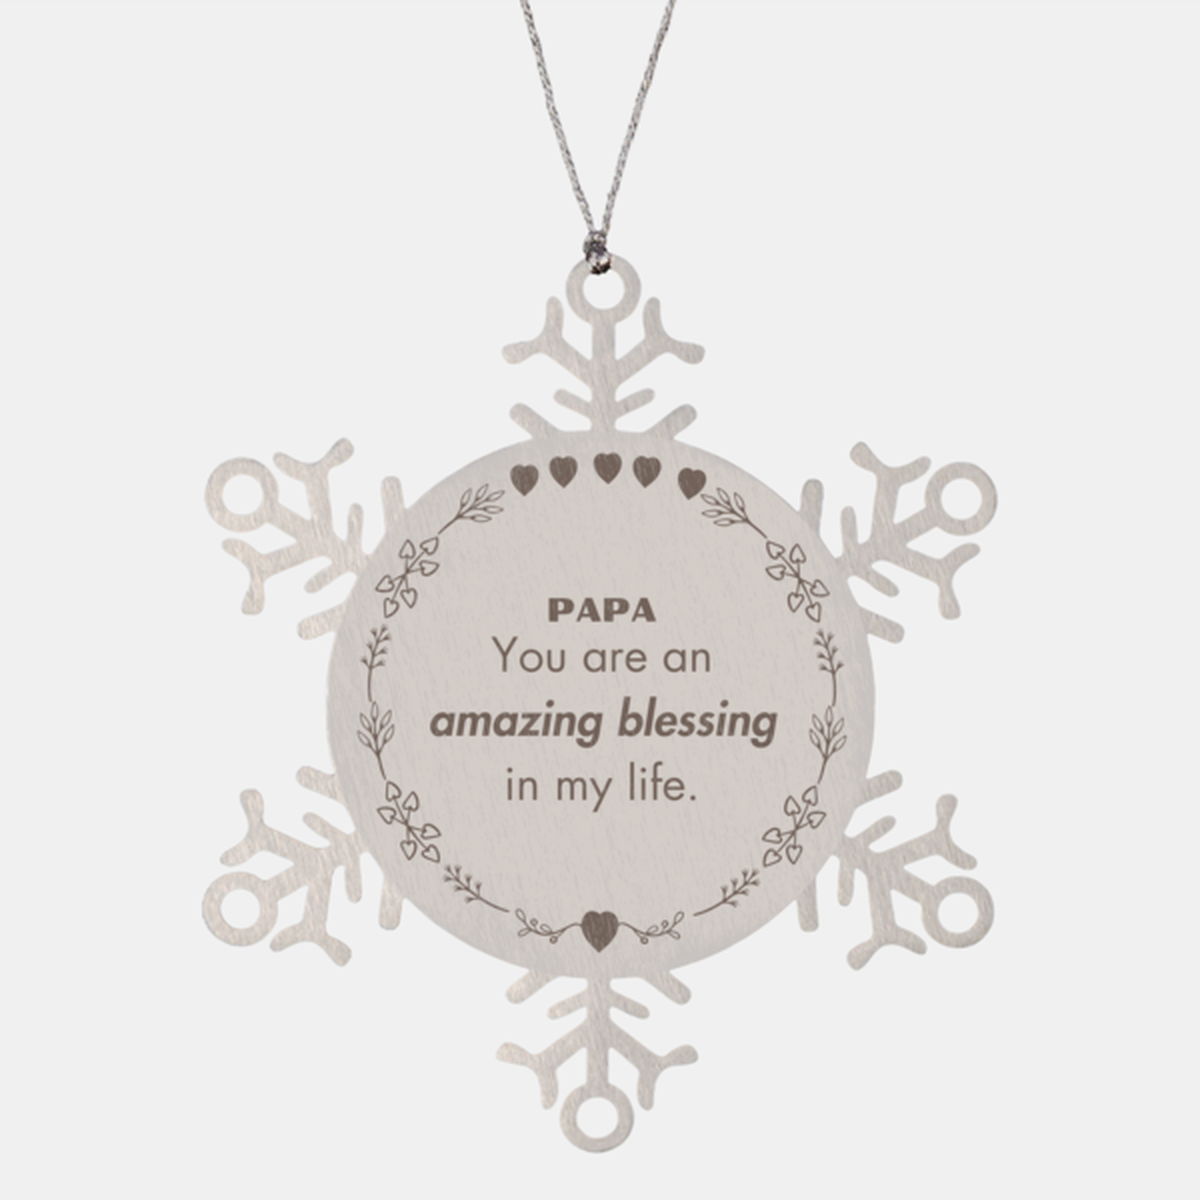 Papa Snowflake Ornament, You are an amazing blessing in my life, Thank You Gifts For Papa, Inspirational Birthday Christmas Unique Gifts For Papa